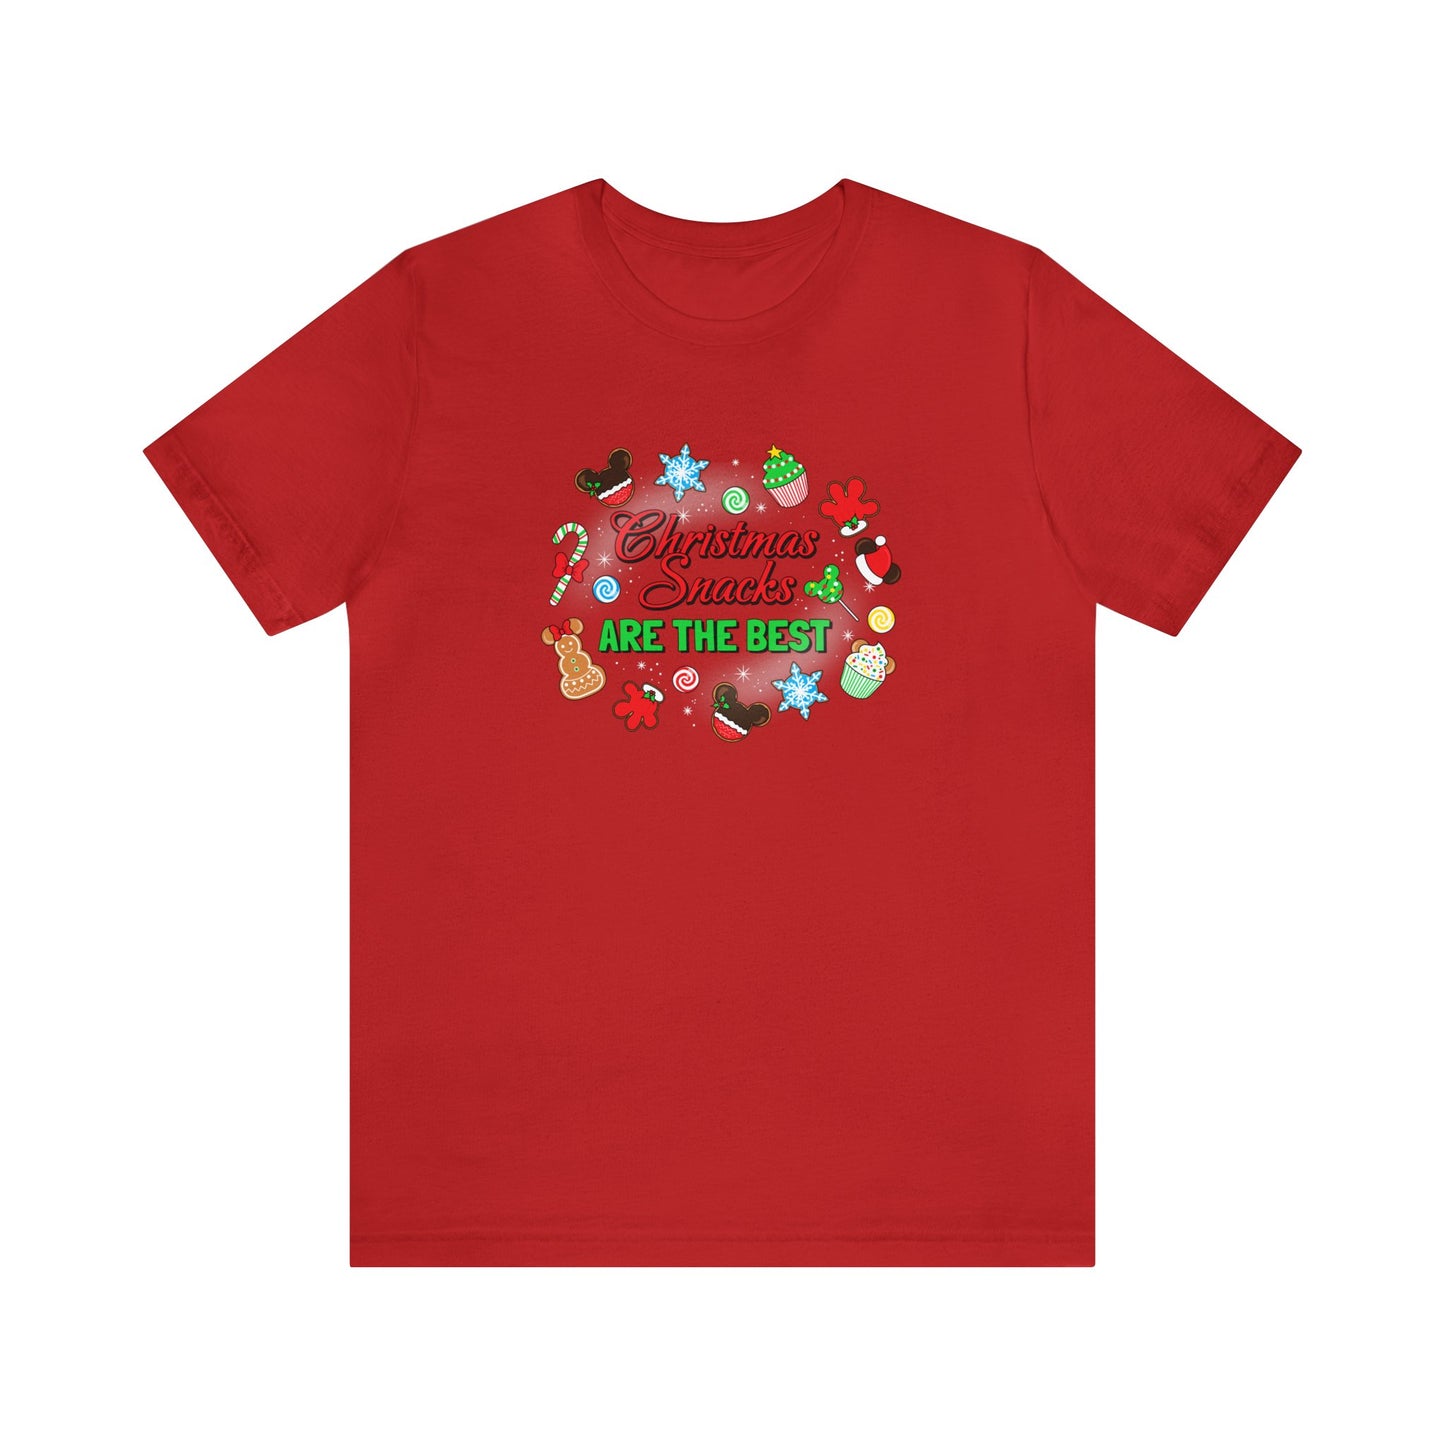 Christmas Snacks Are The Best Unisex Graphic Tee